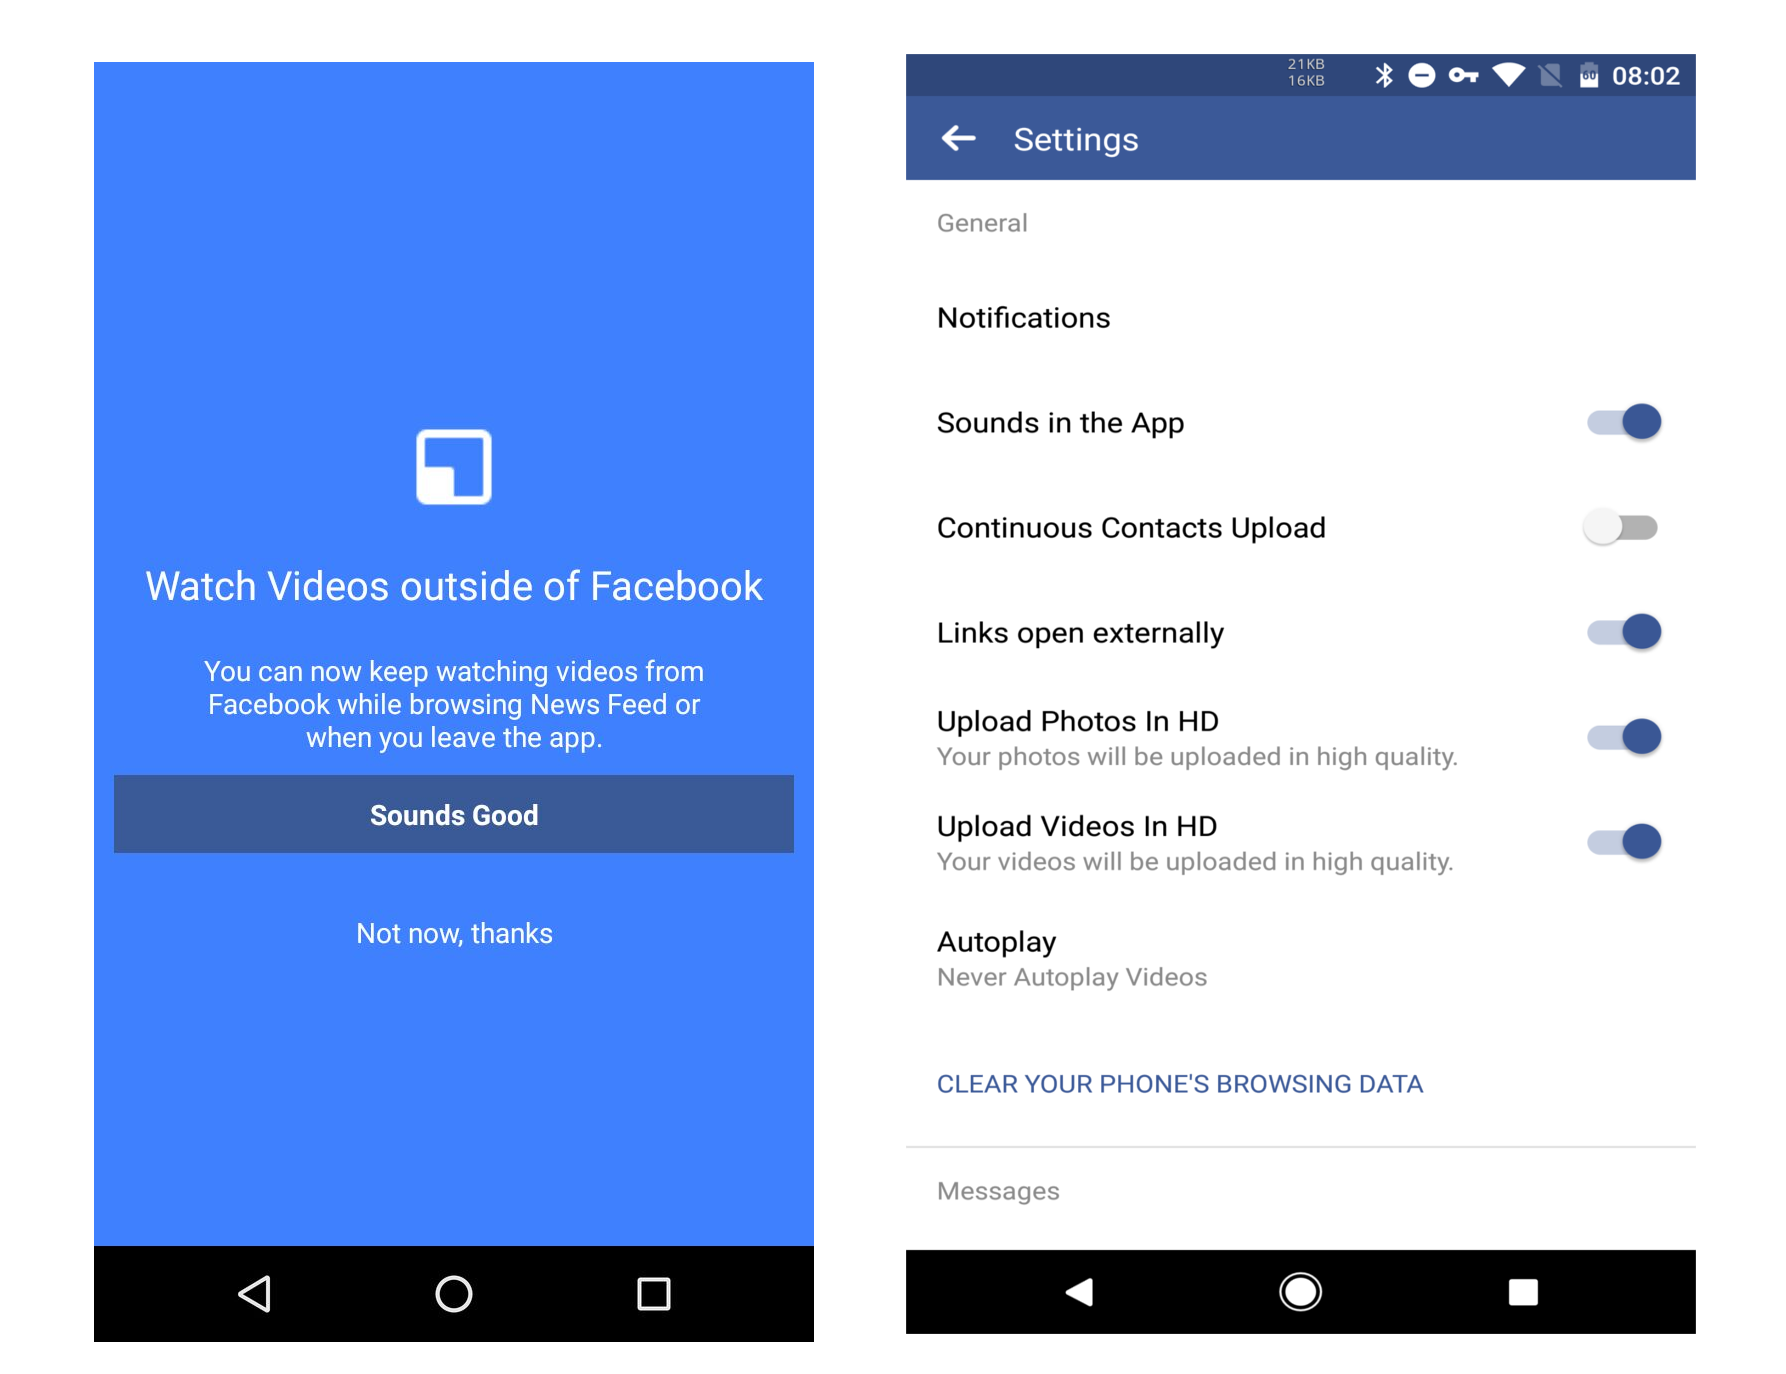 The Facebook app on Android now allows you to upload videos in HD